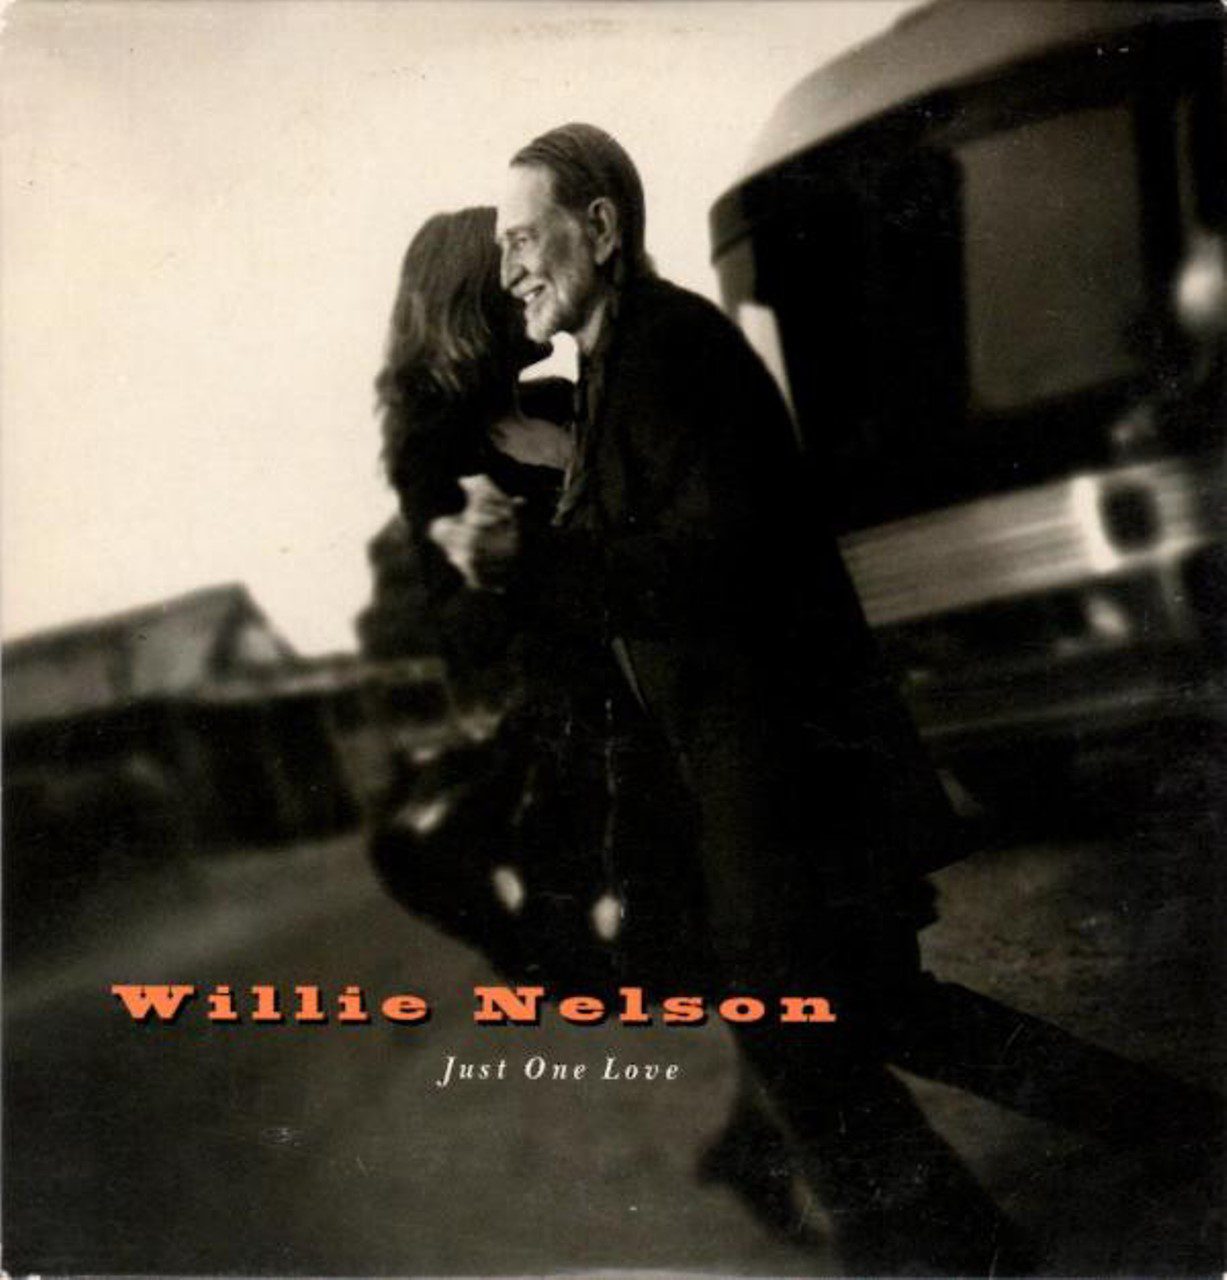 Willie Nelson – Just One Love cover album